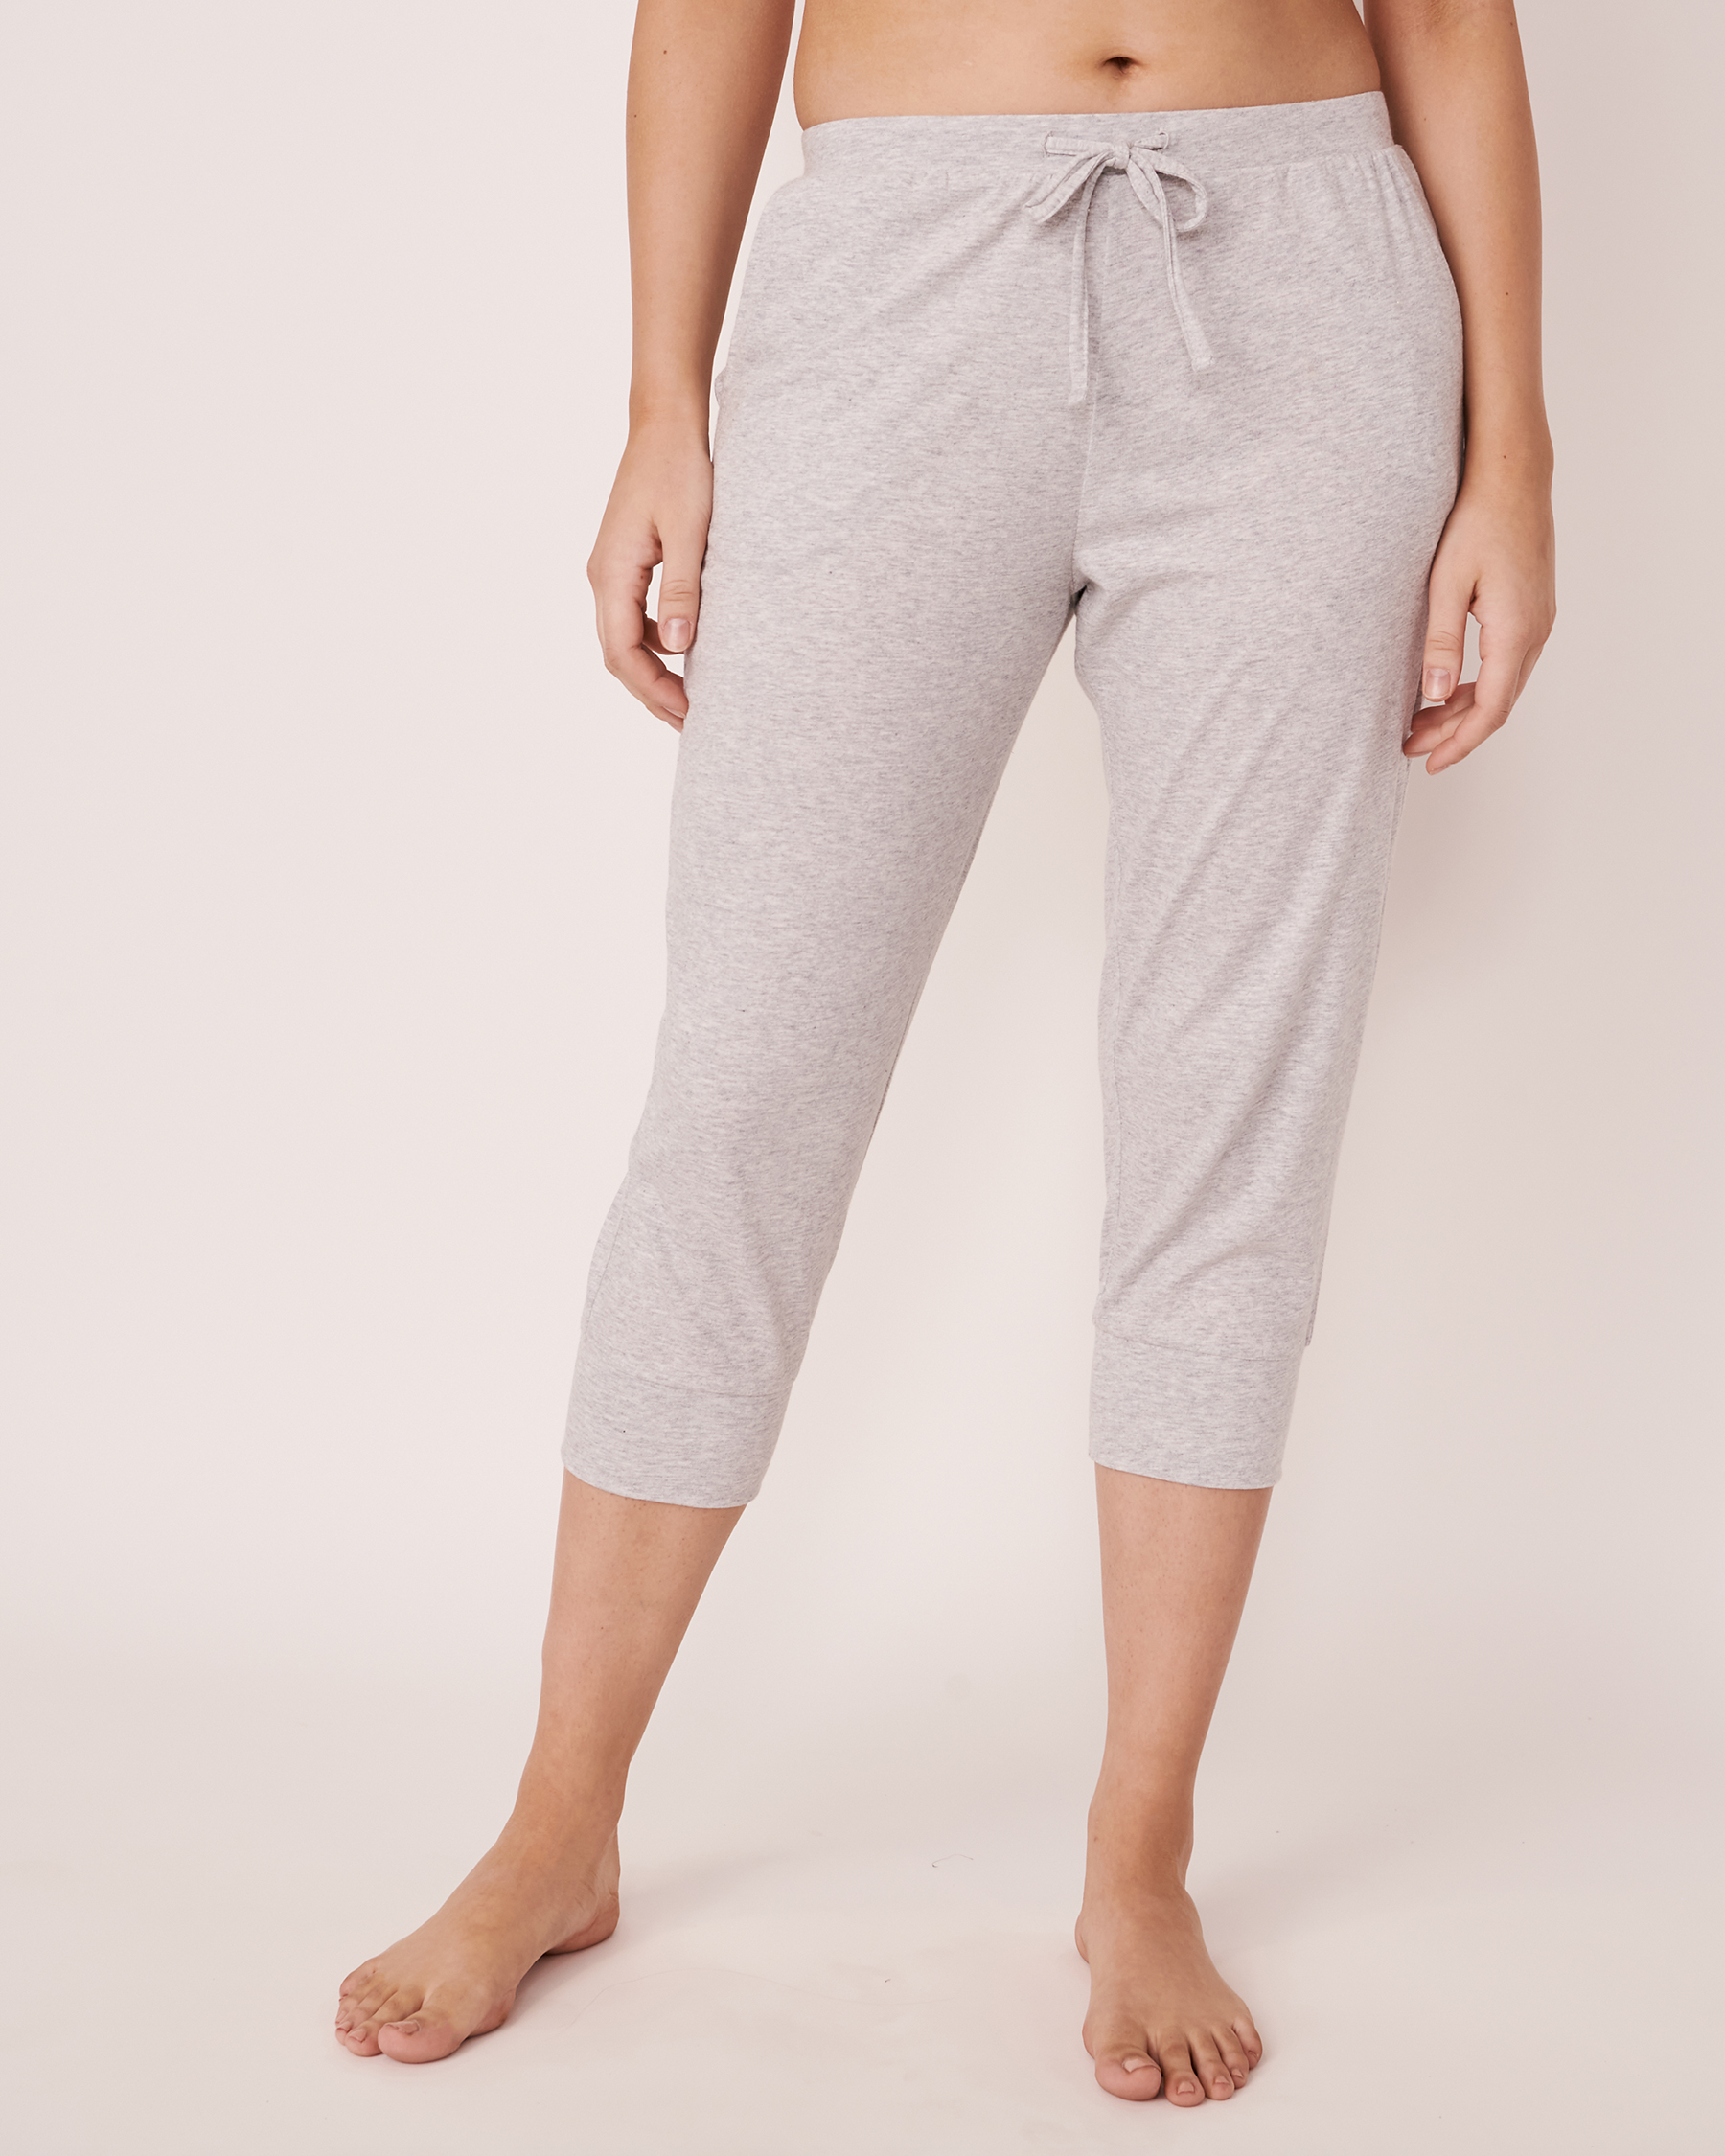 Fitted Capri with Pockets - Comfy grey